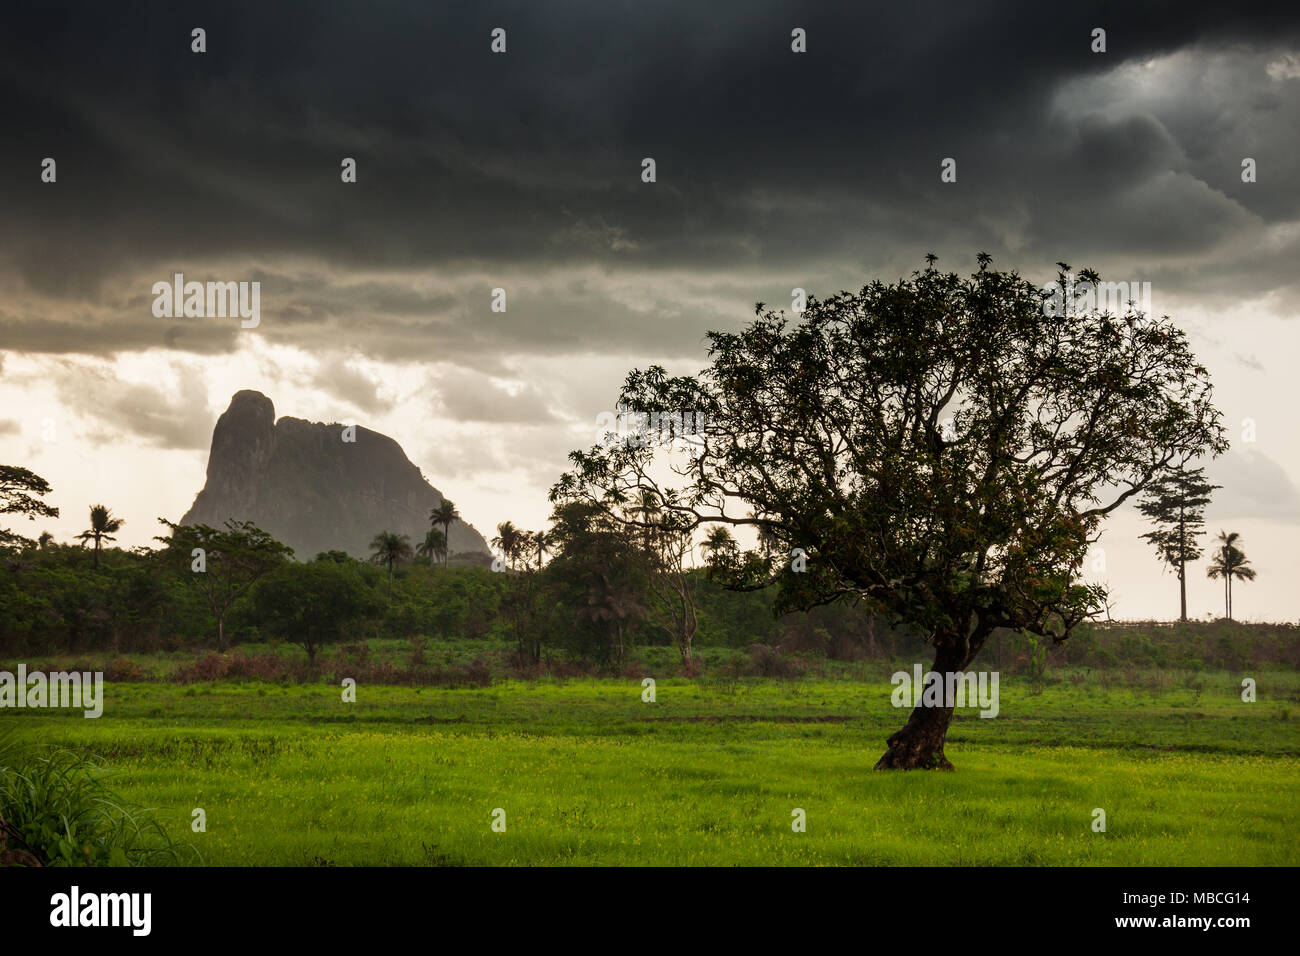 MAKENI, SIERRA LEONE - June 06, 2013: West Africa, the mountain and the forest near Makeni on a thunderstorm day, Sierra Leone Stock Photo